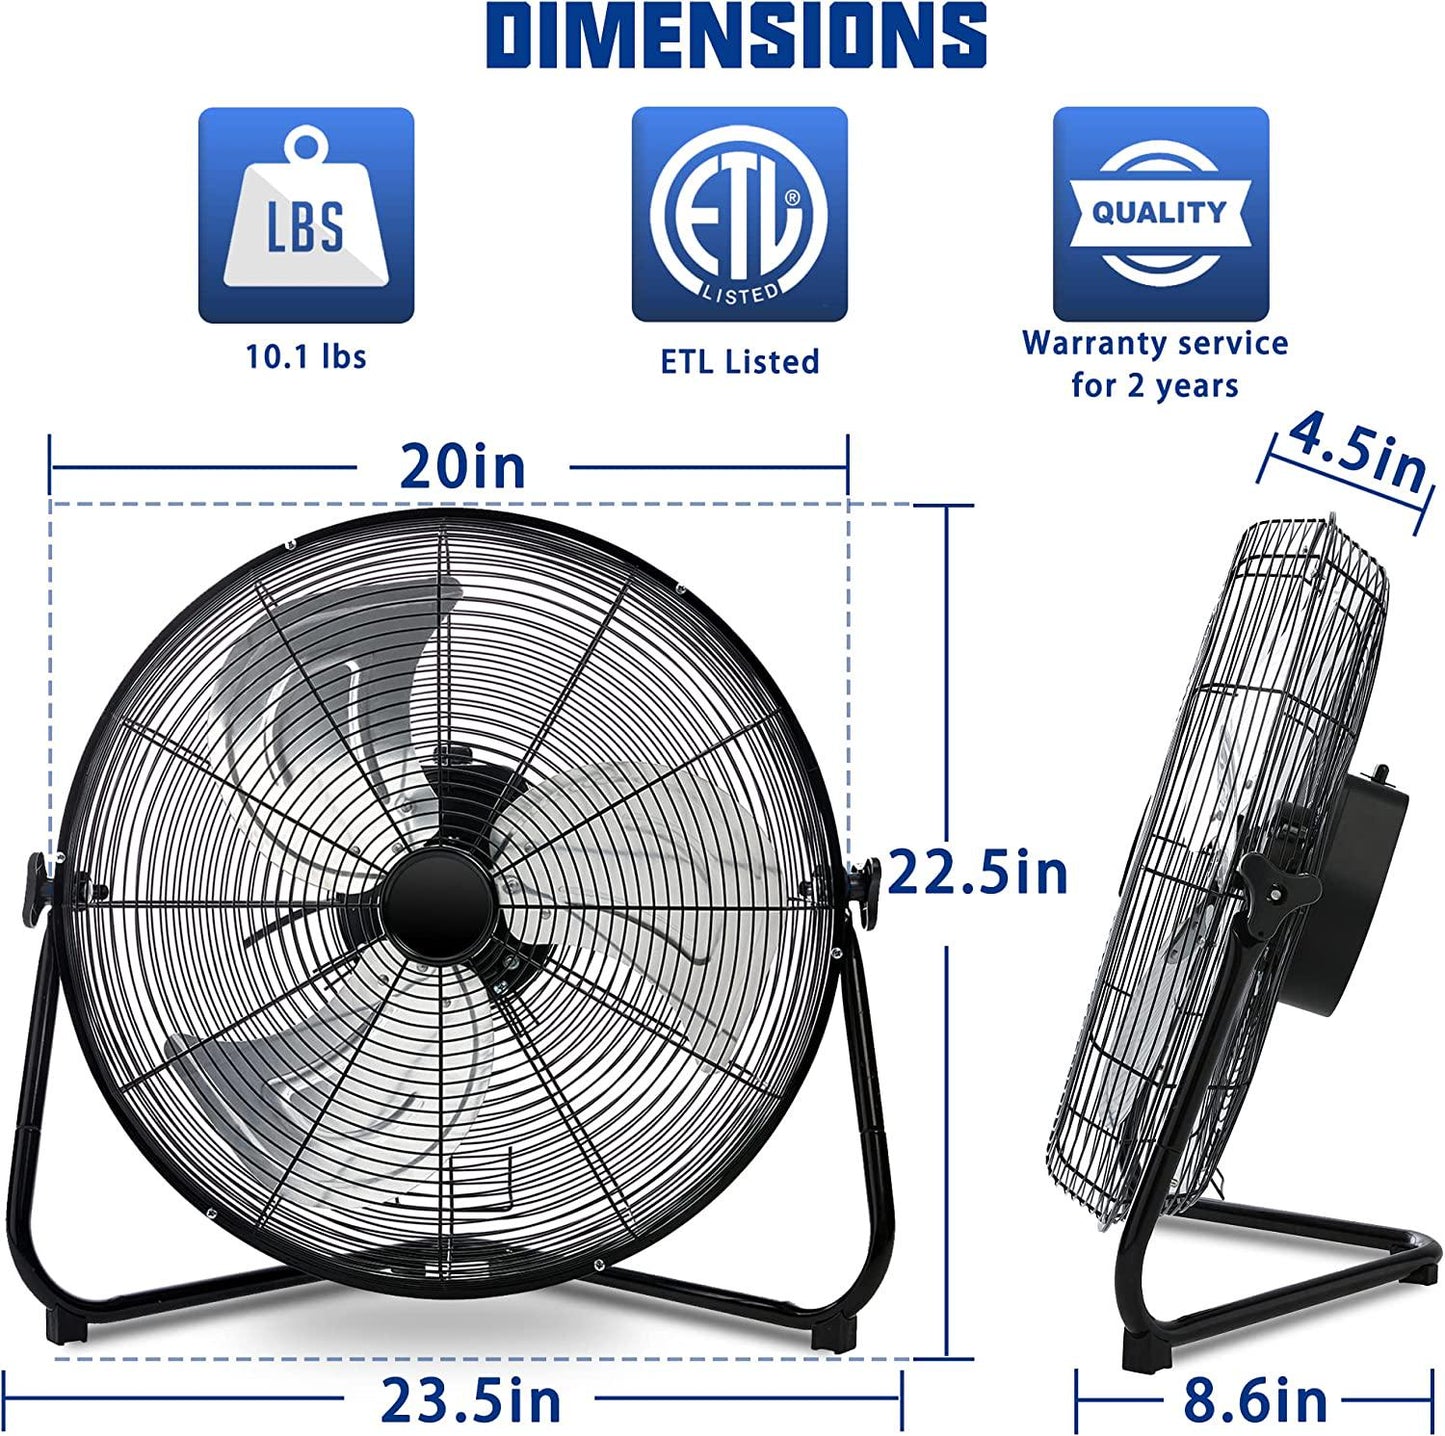 FLAME 6000 CFM Floor Fan High Velocity,20 Inch 3-Speed Heavy Duty Metal Fan with Wall-Mounting System,360° Adjustable Tilting